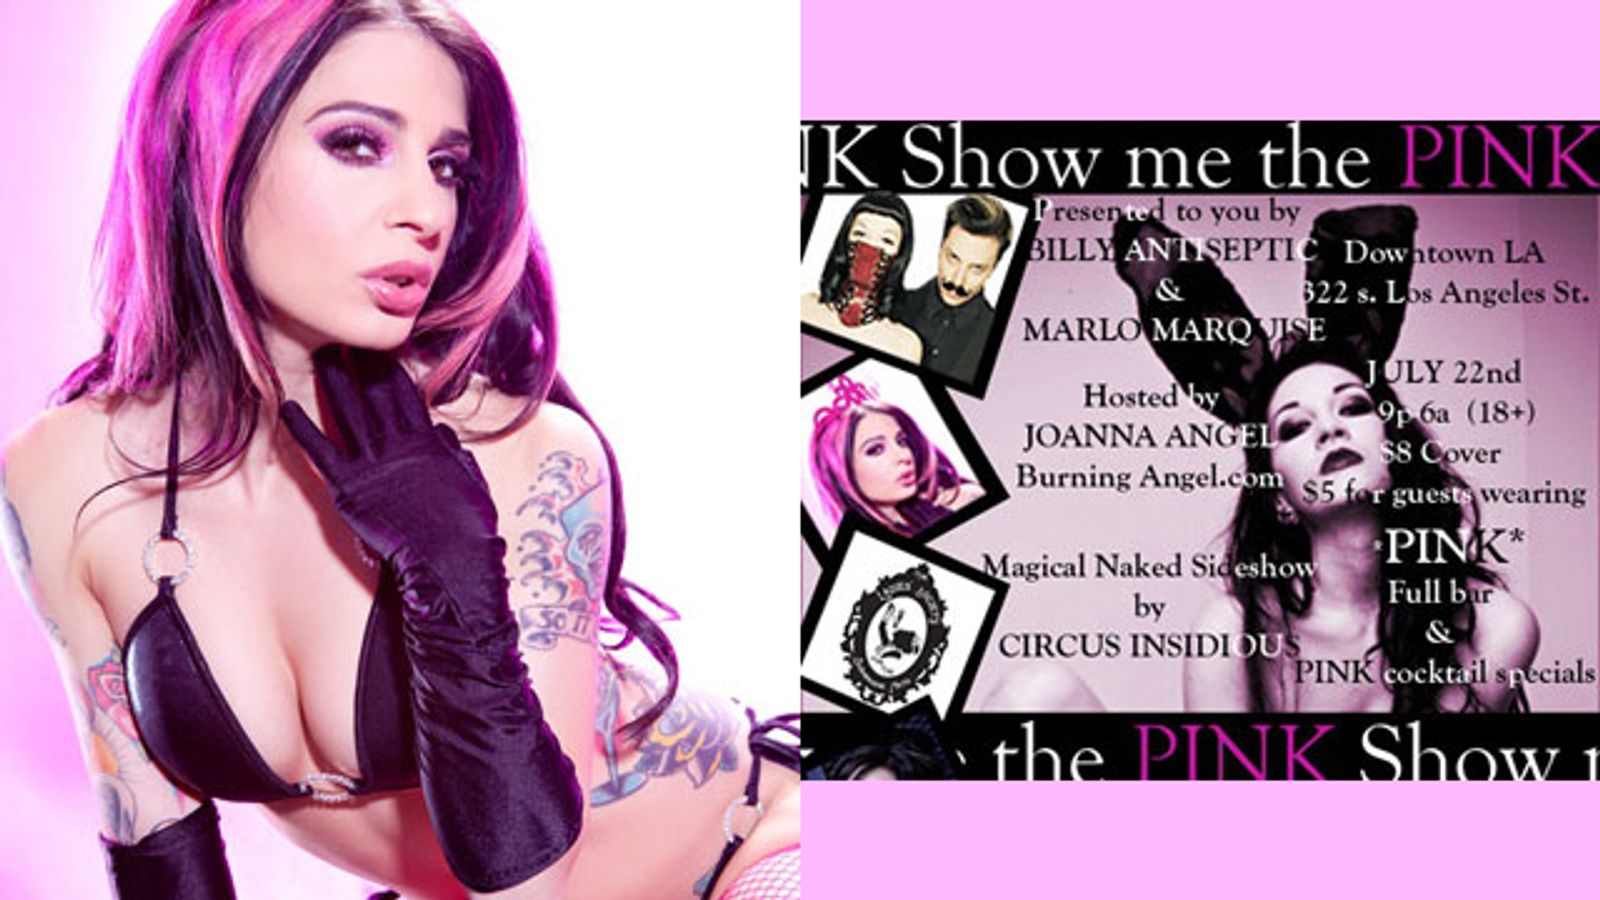 Joanna Angel Hosts The Pink Party in Downtown L.A. Friday Night